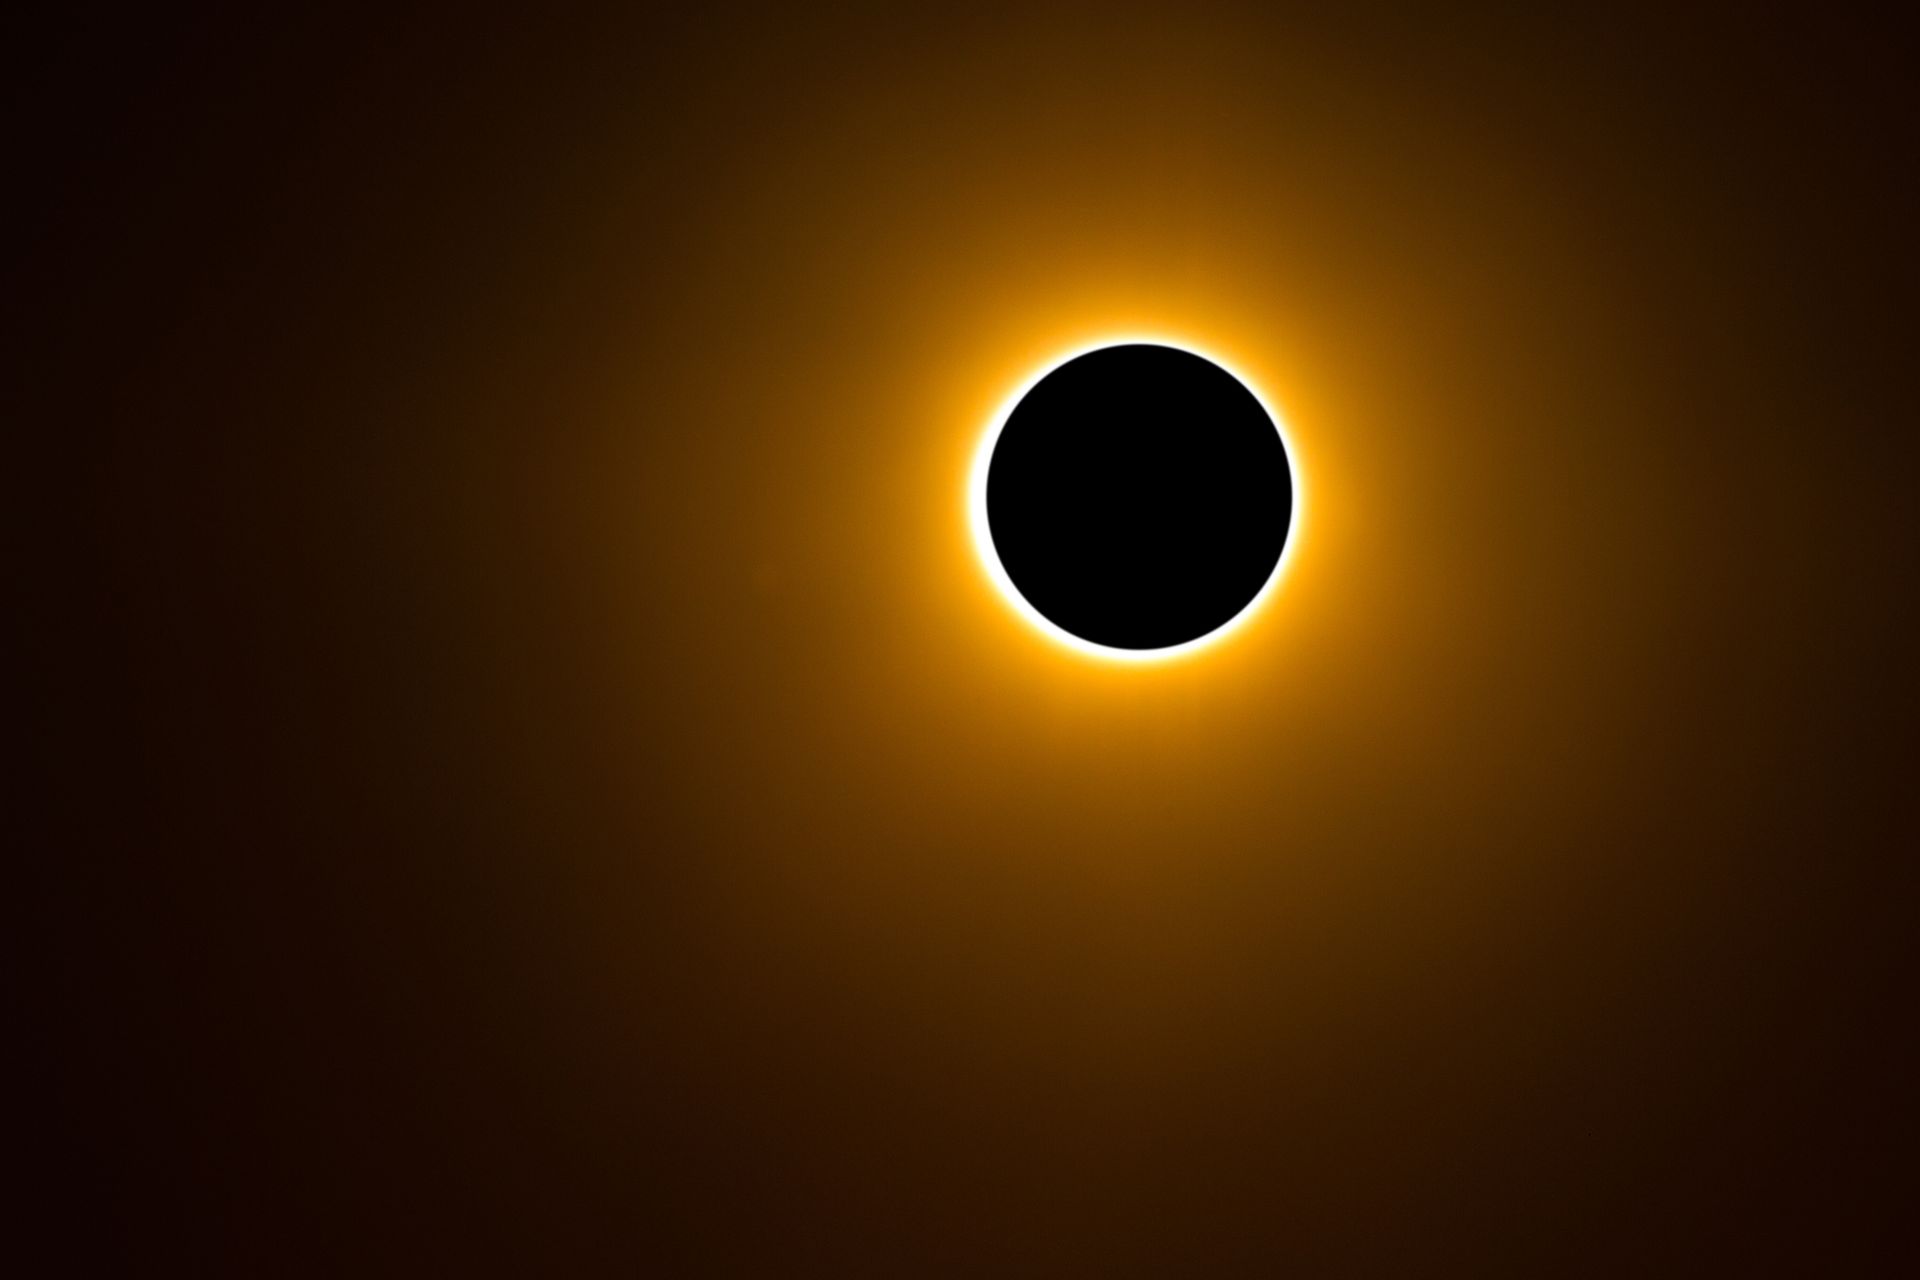 Annular Eclipse Klamath County Ring of Fire 2023 Viewing locations